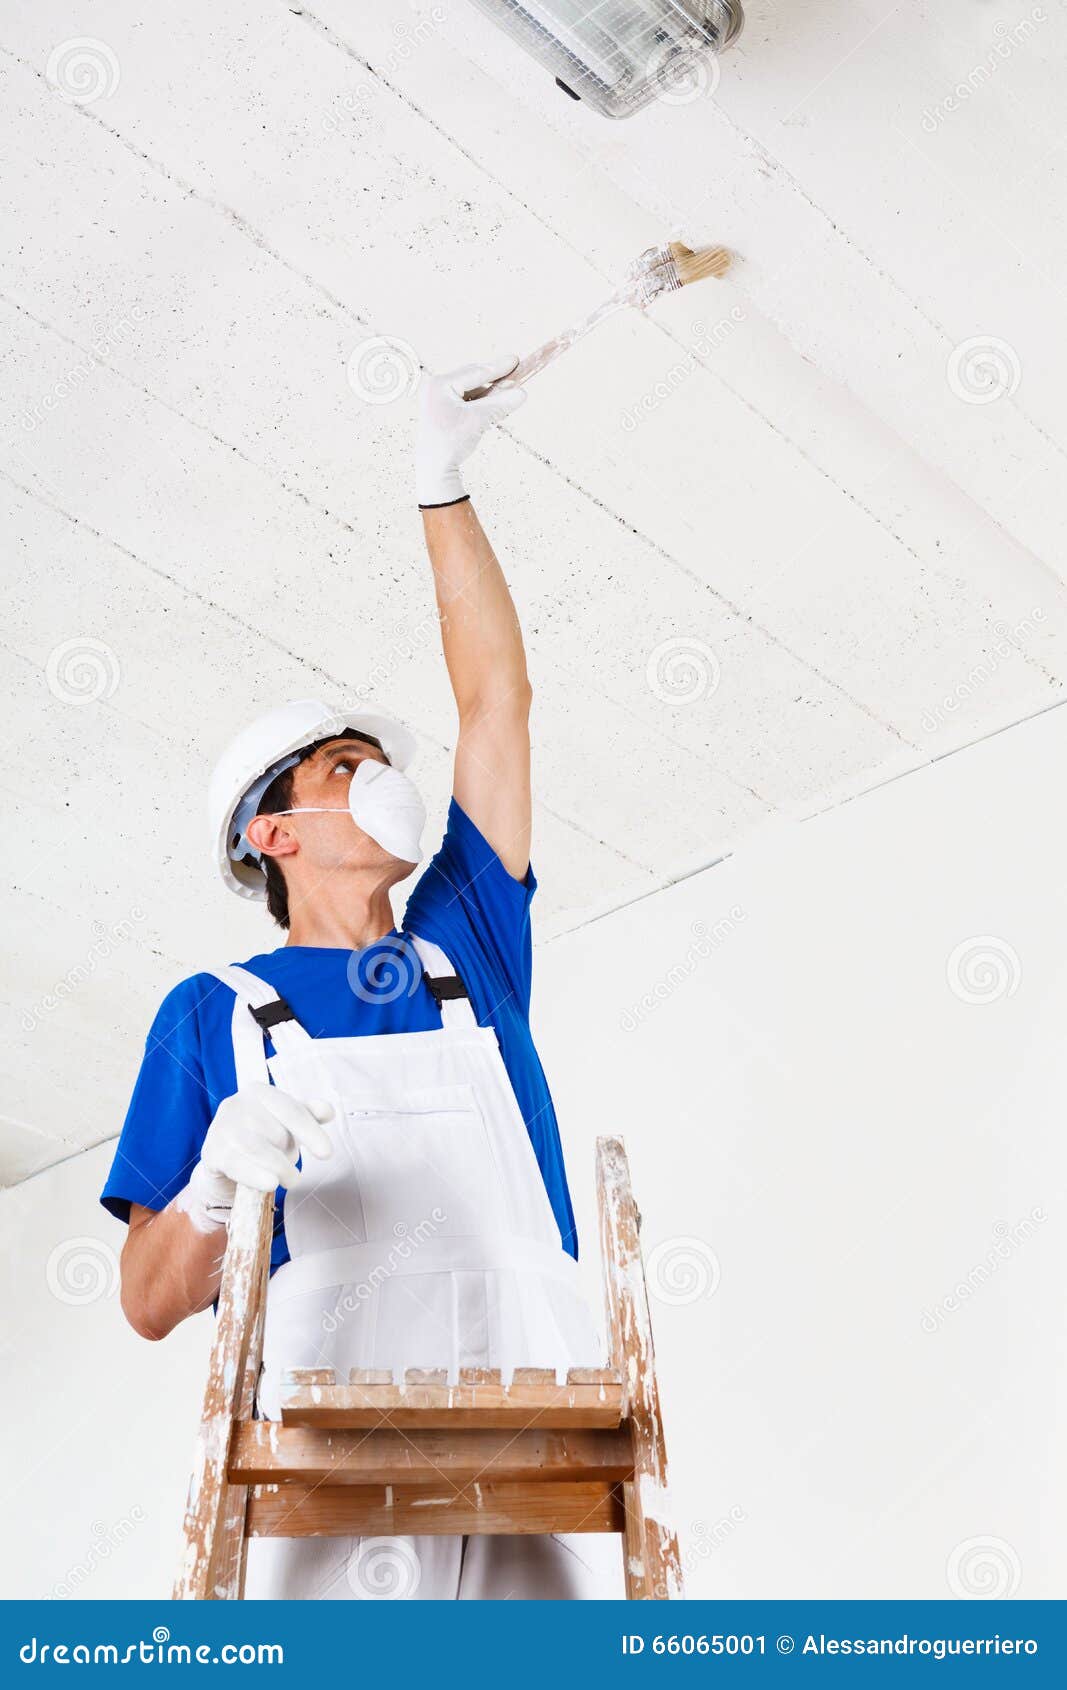 Painter Painting Ceiling With Brush Stock Image Image Of Brush